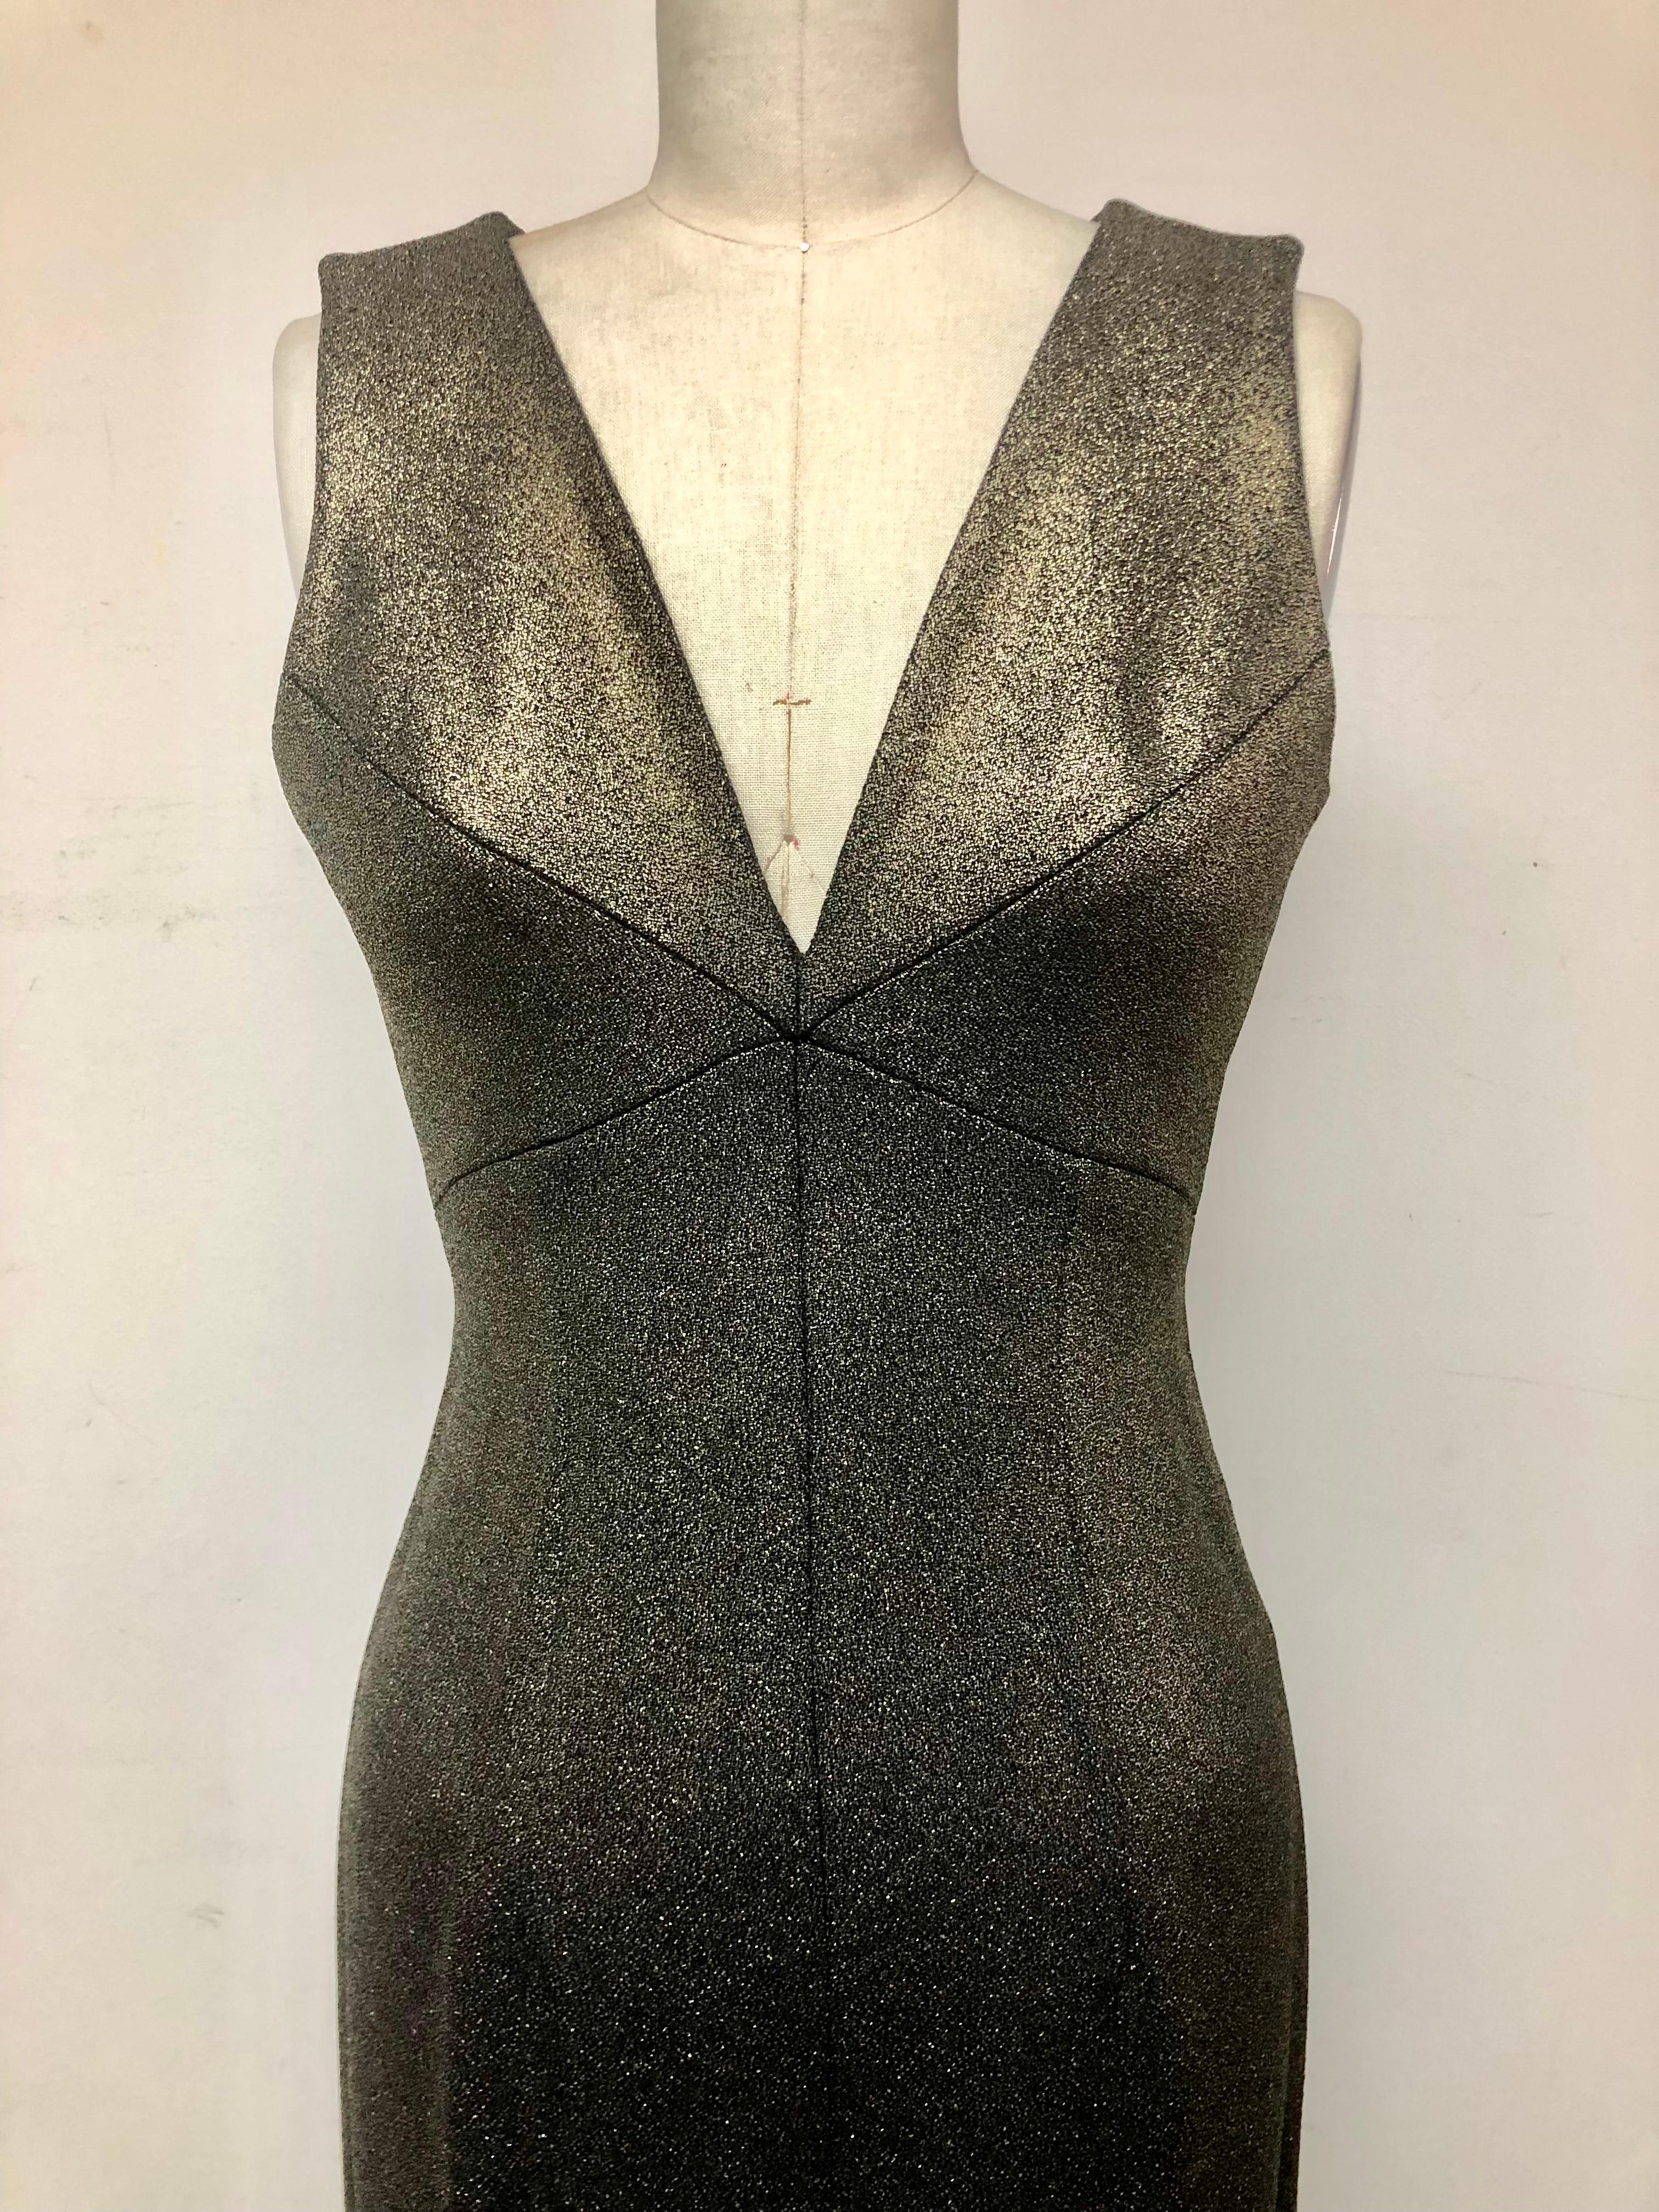 Unique flattering seaming makes for a shapely silhouette 
aka Body Dress. Taroni silk blend gold /black lame reflective quality makes for an elegant sheen that's perfect for holiday evening and beyond.
A perfect  Cocktail dress or Wedding Guest.